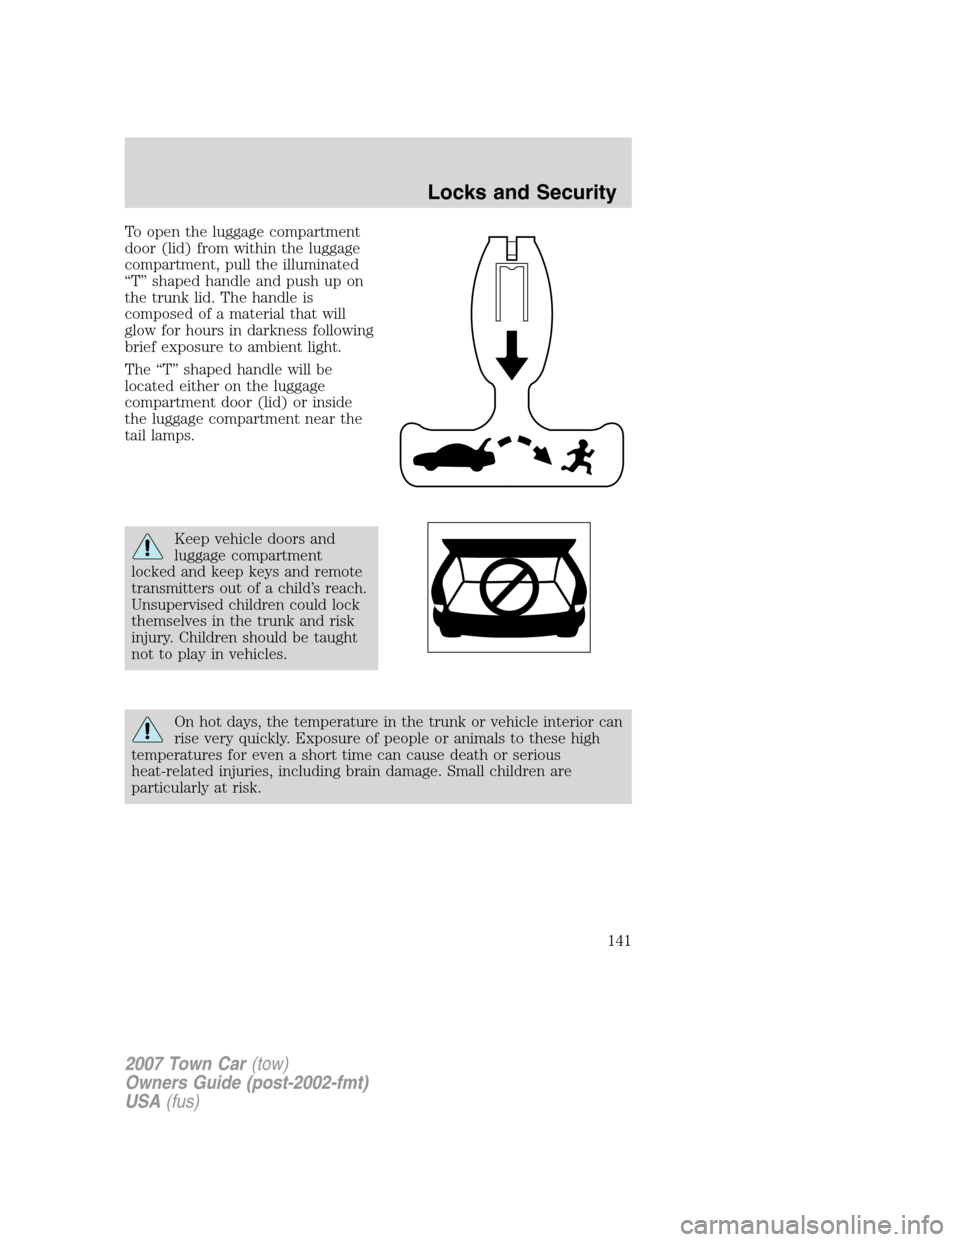 LINCOLN TOWN CAR 2007 User Guide To open the luggage compartment
door (lid) from within the luggage
compartment, pull the illuminated
“T” shaped handle and push up on
the trunk lid. The handle is
composed of a material that will
